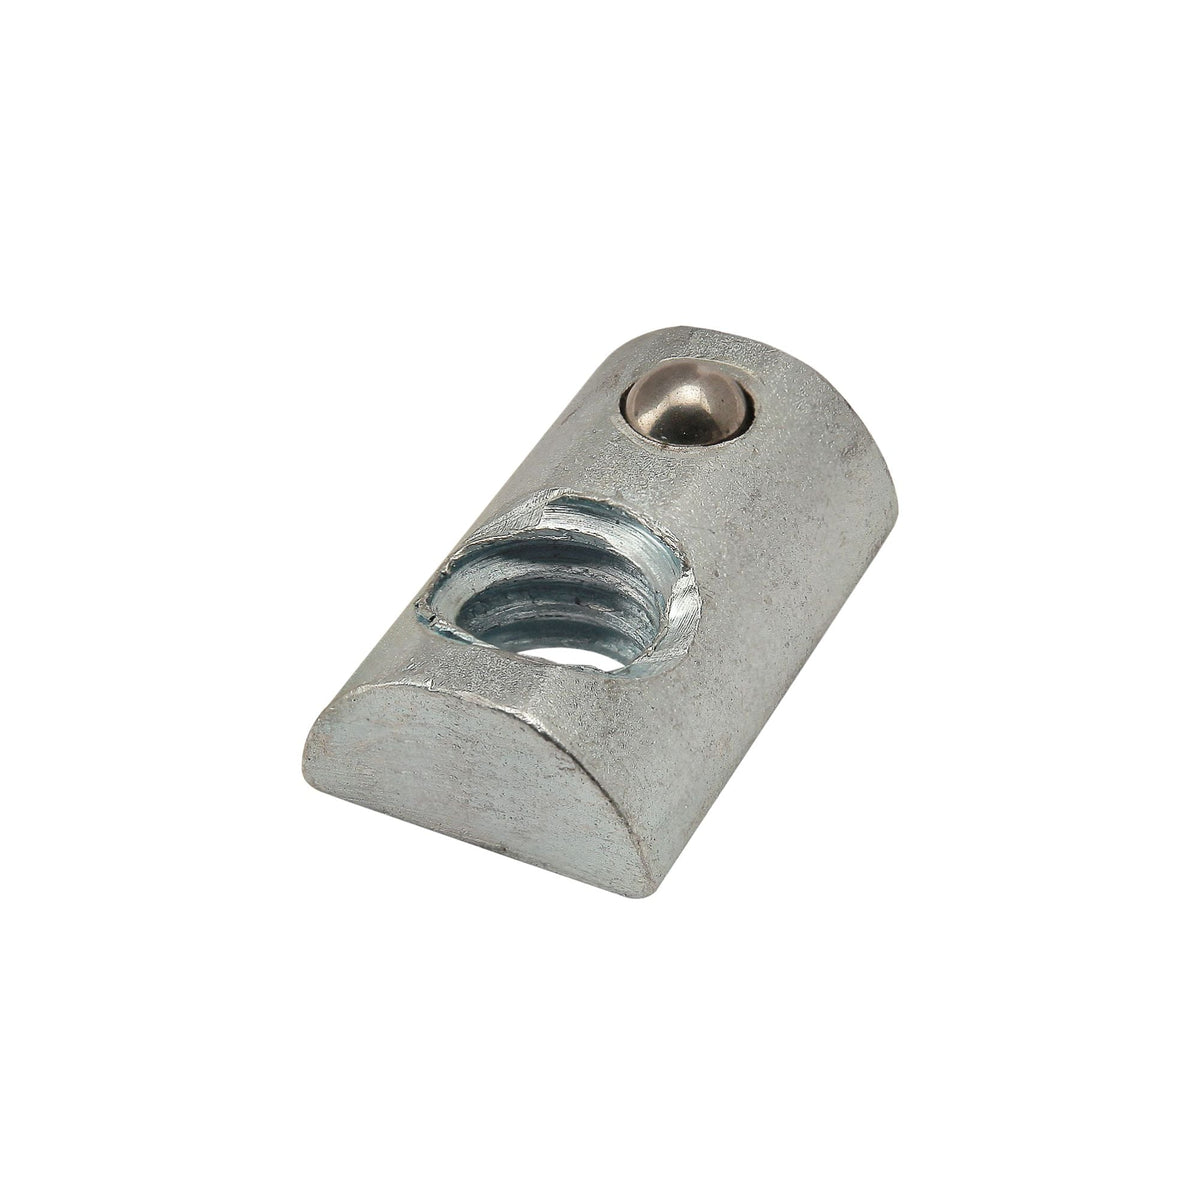 rectangular t-nut with a flat bottom, a rounded top, a threaded hole on one side and a ball spring on the other side